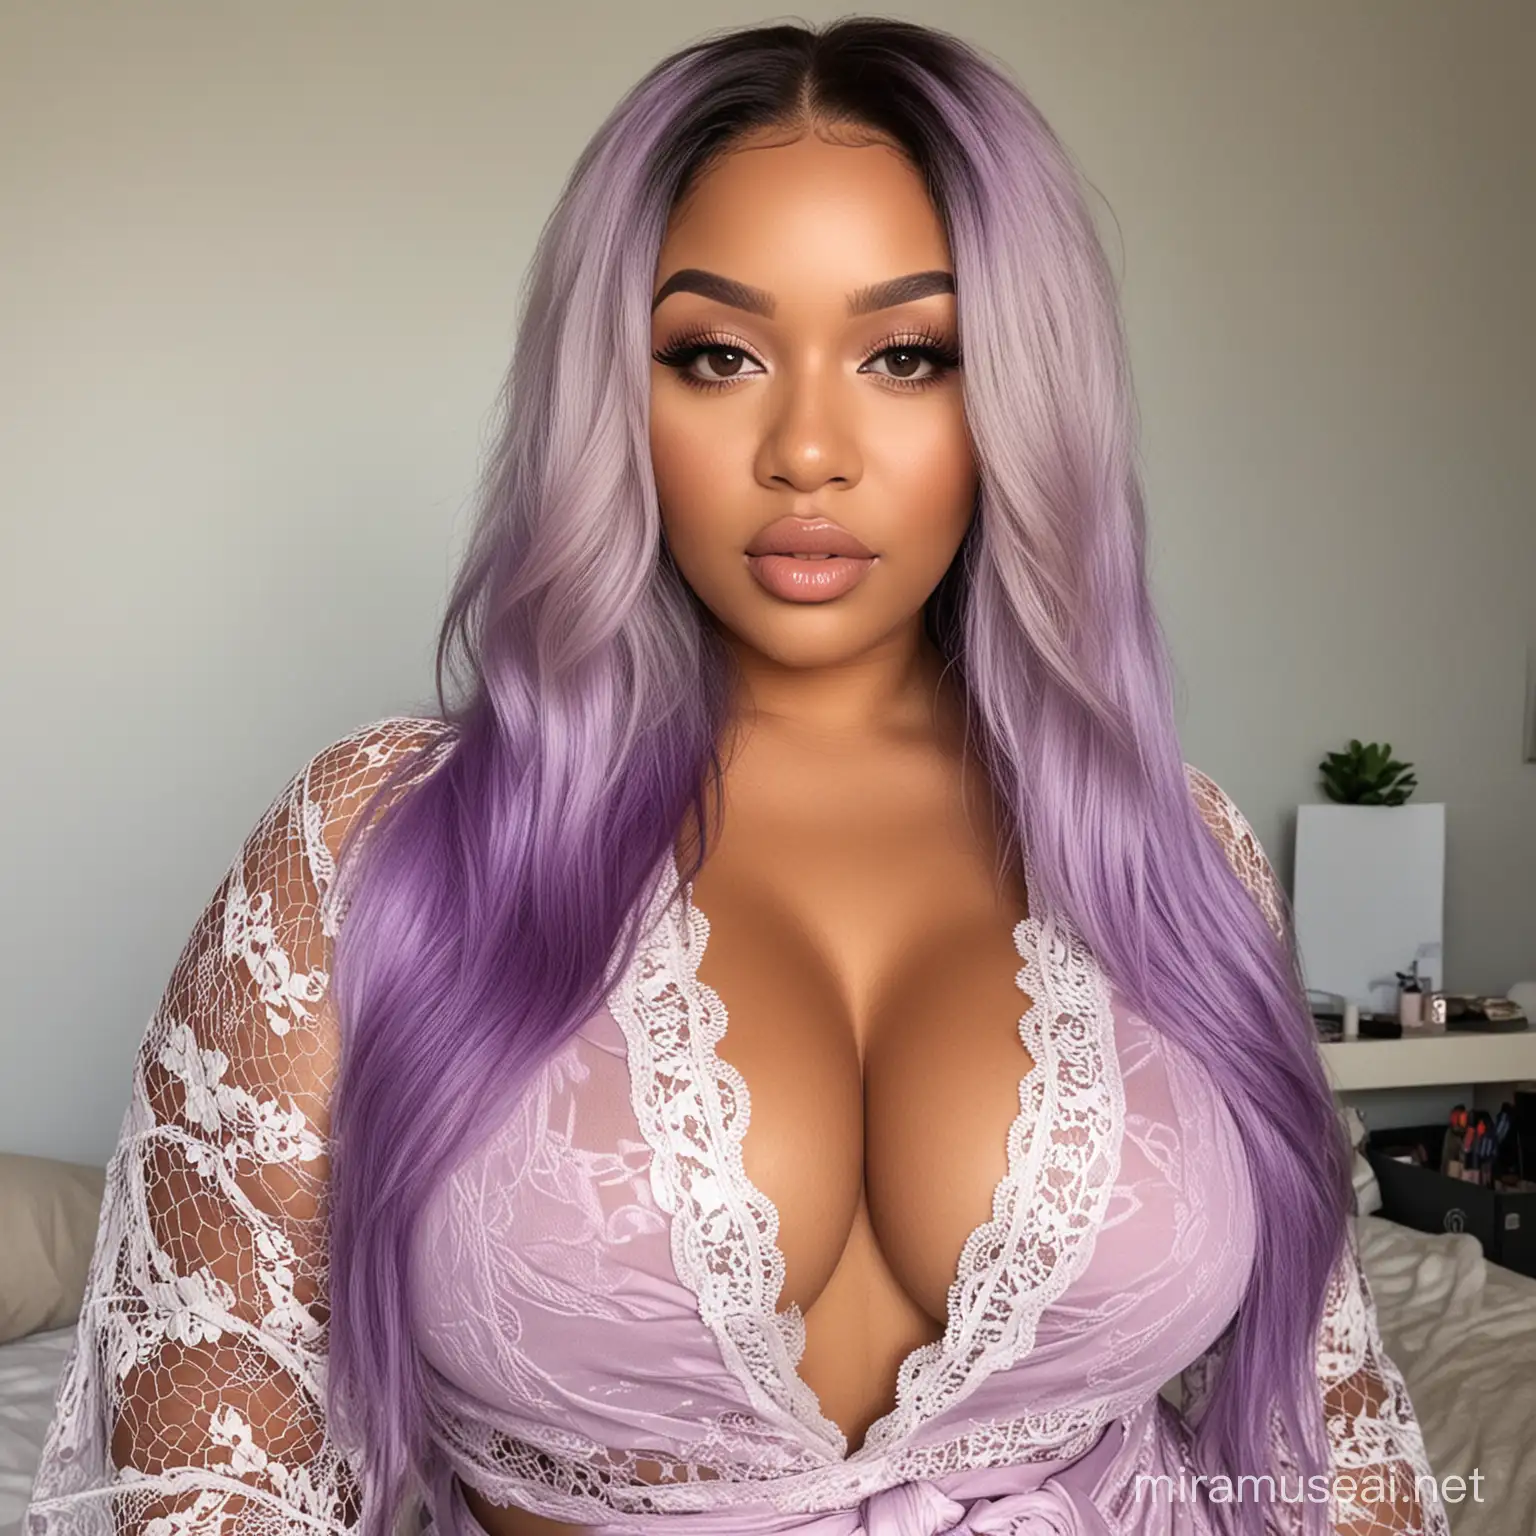 Image prompt/: generate pictures full length of a light skinned south african curvy, thick girl that looks like me, with a straight hd lace front weave, purple lingerie with a short robe